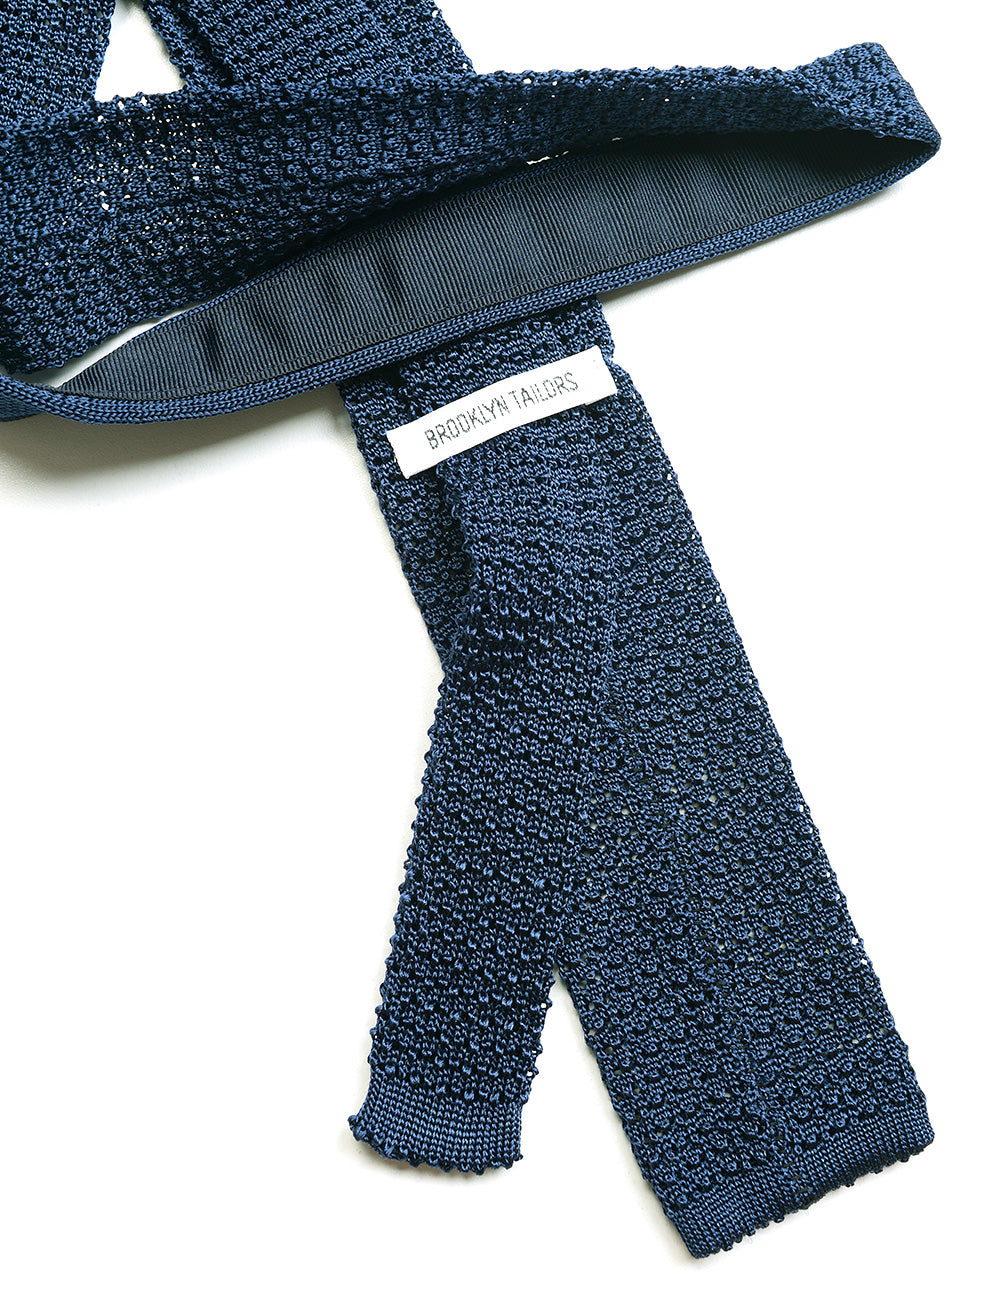 Detail of Italian Silk Knit Tie  - Aegean Blue showing label and fabric texture